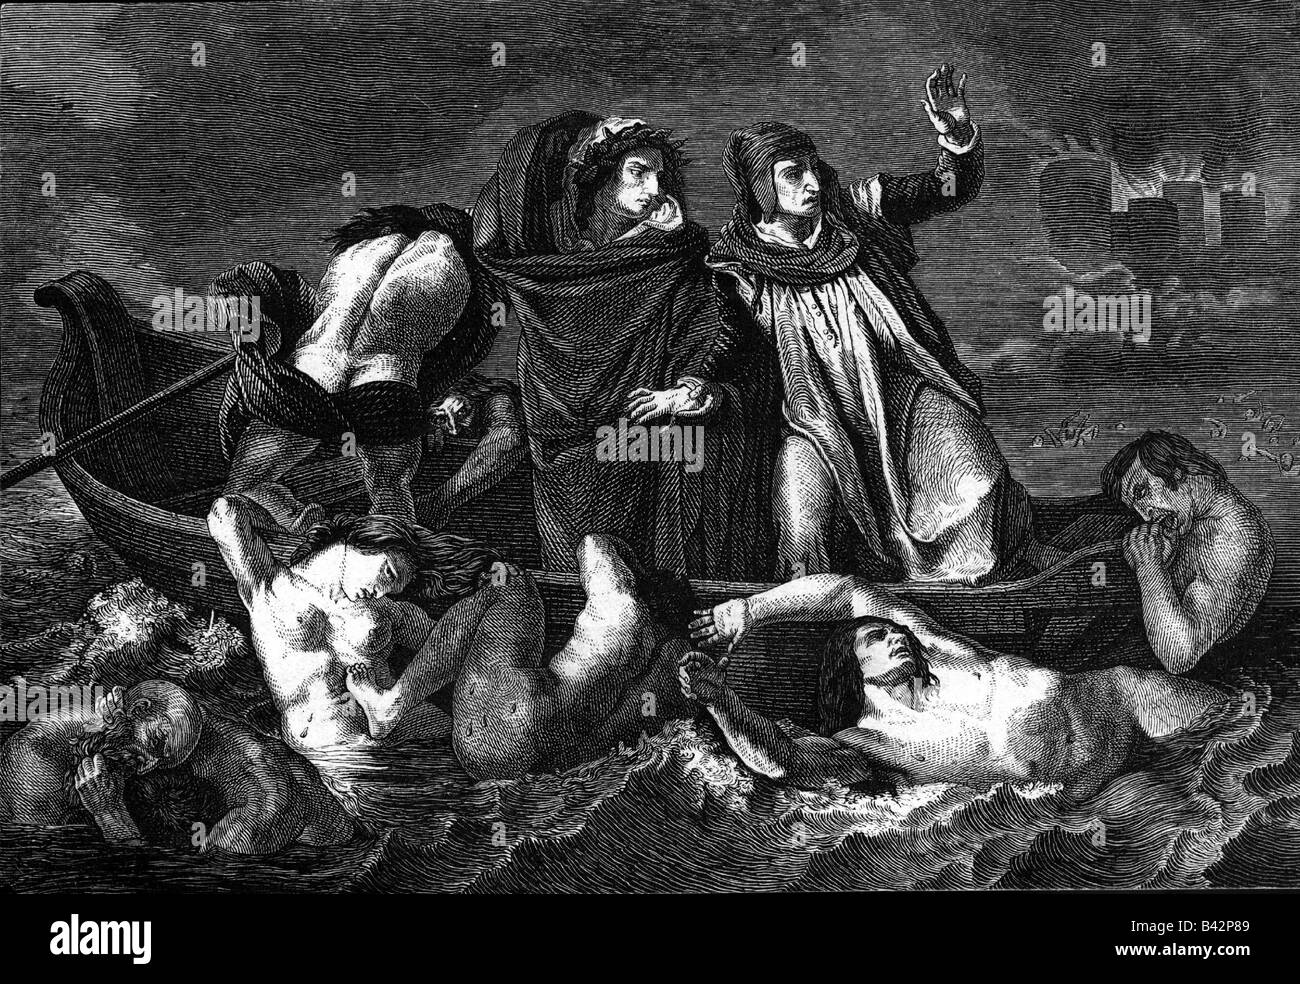 Dante, Alighieri, 1265 - 14.9.1321, Italian poet, works, 'Divine Comedy', Dante and Virgil in the hell with the wrathful people, wood engraving, by Eugen Delacroix, Stock Photo